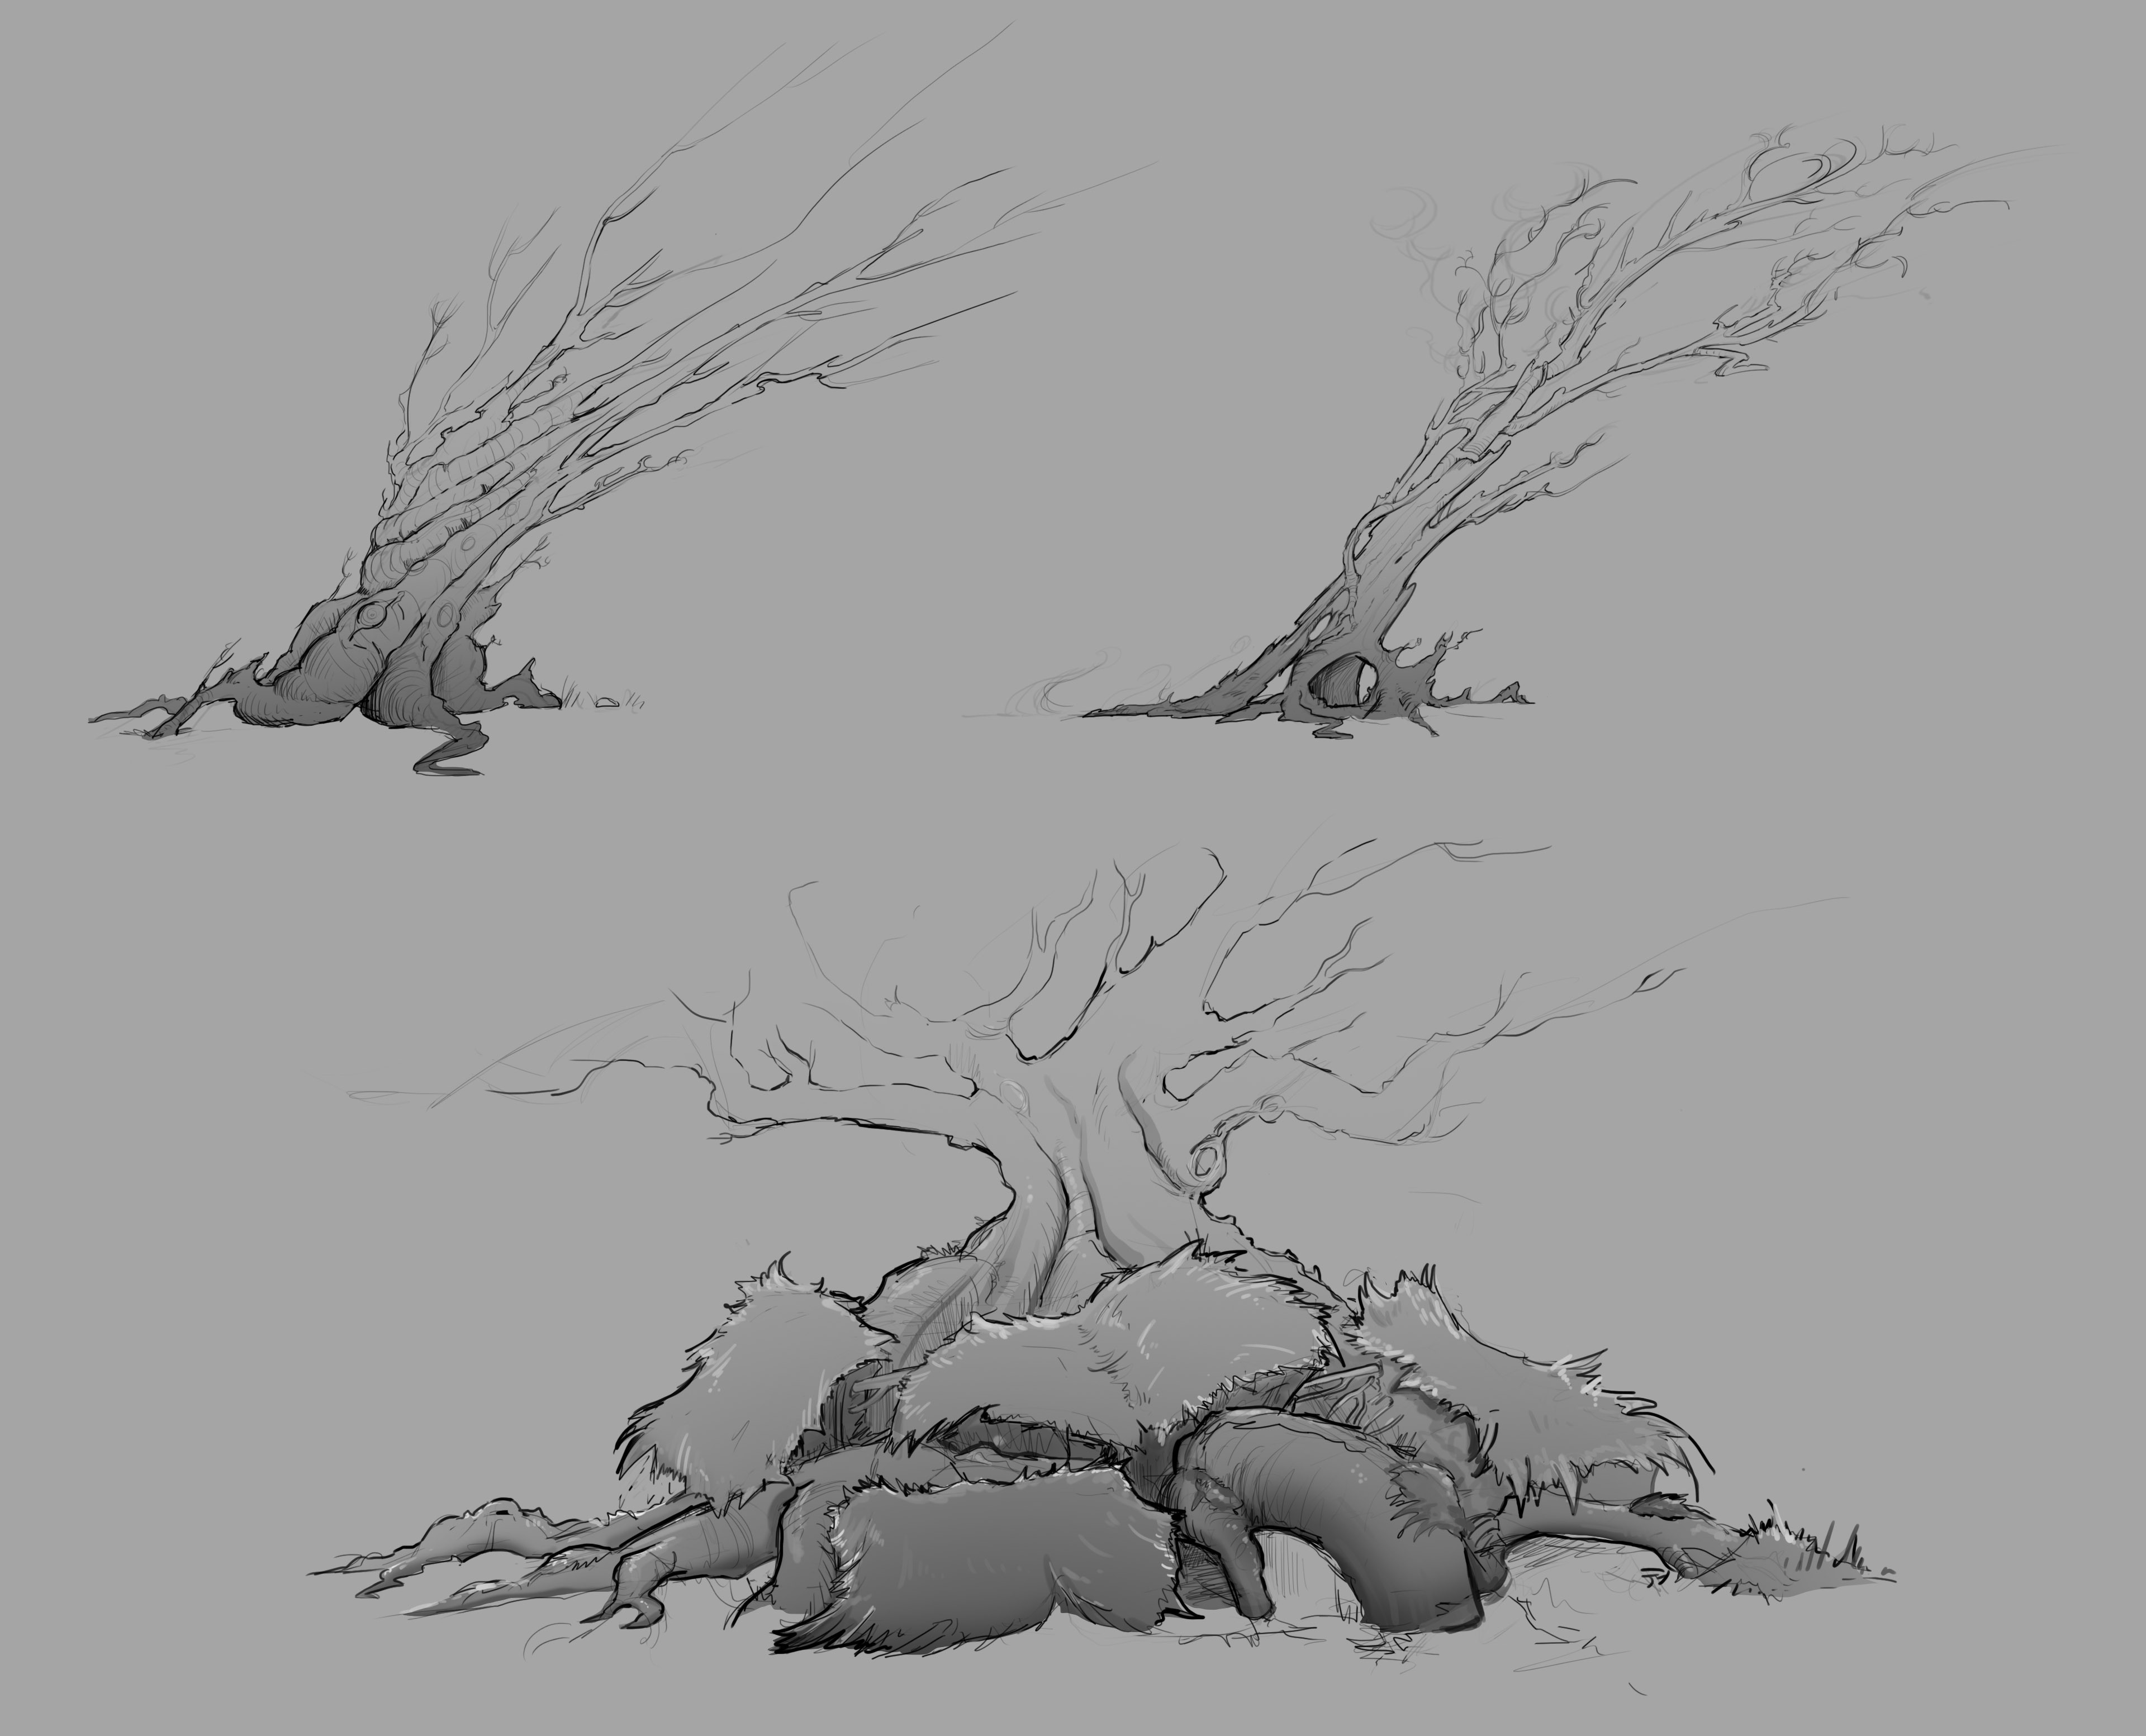 Some initial sketches I did, ended up with going for a different look but it was useful to get the creative ball rolling